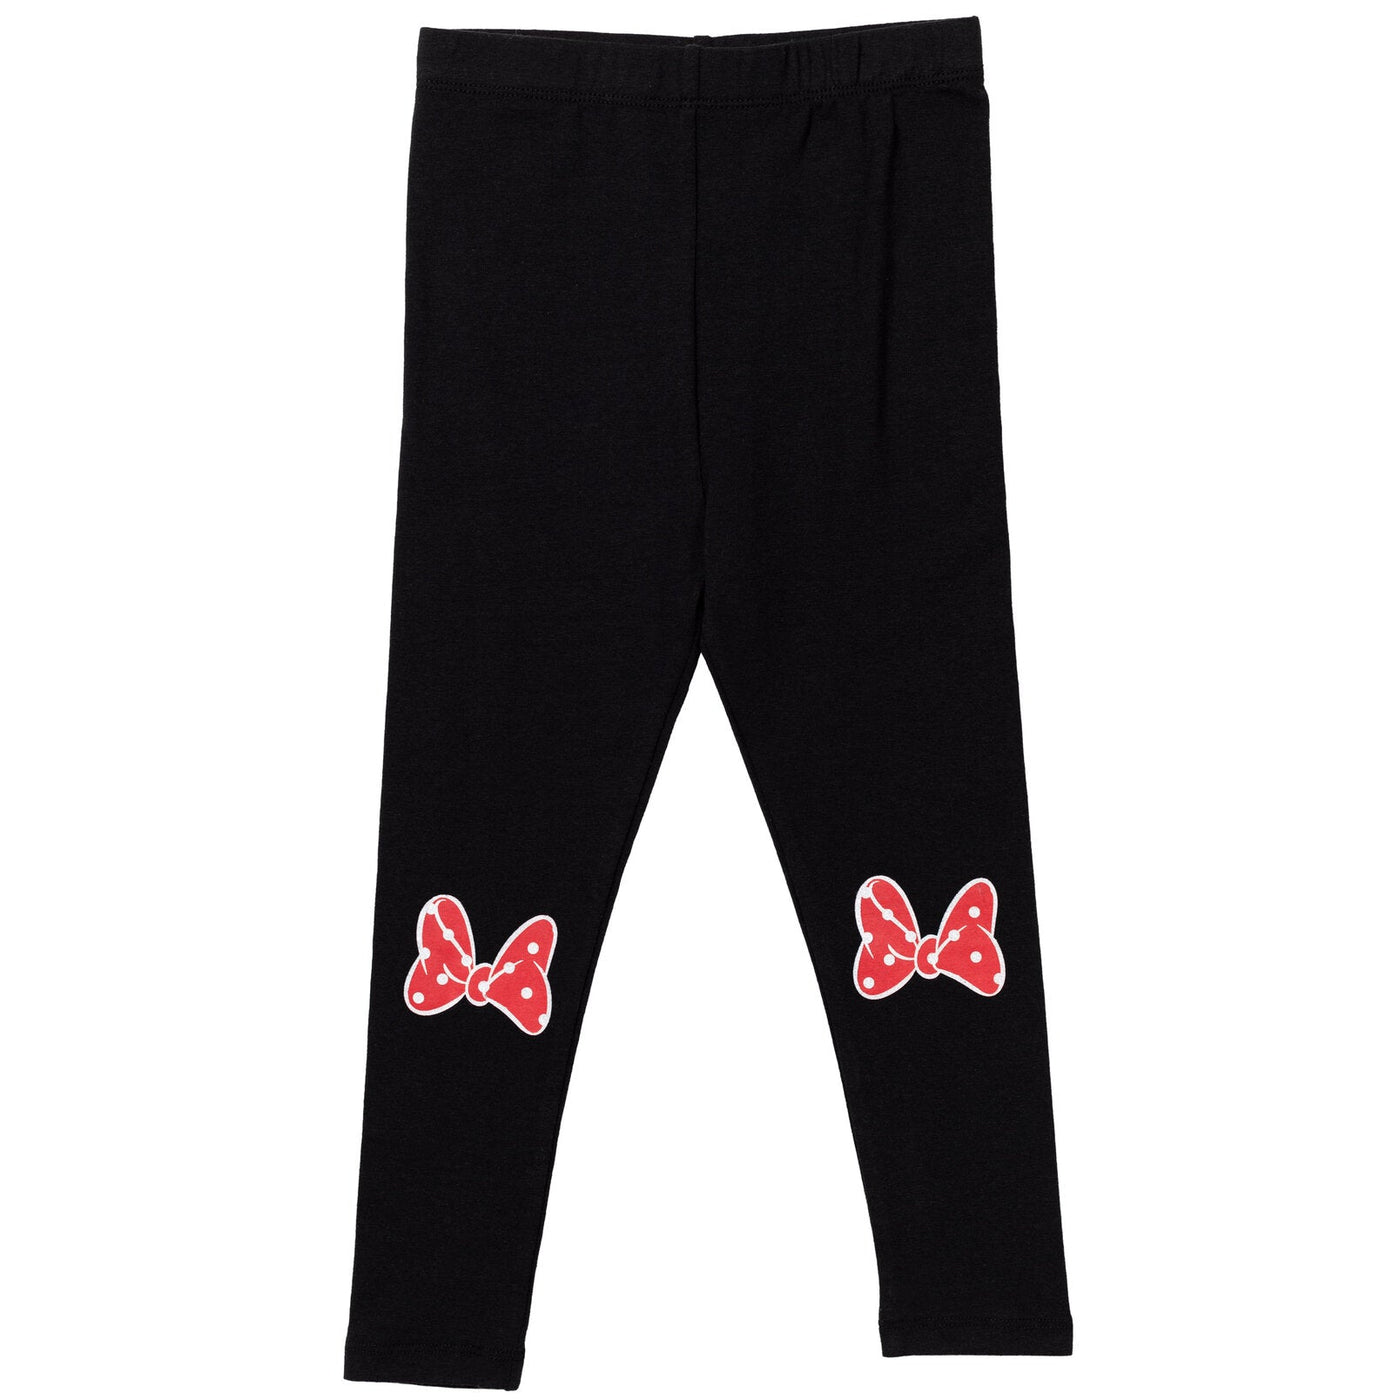 Disney Minnie Mouse Vest Cosplay T-Shirt and Leggings 3 Piece Outfit Set - imagikids